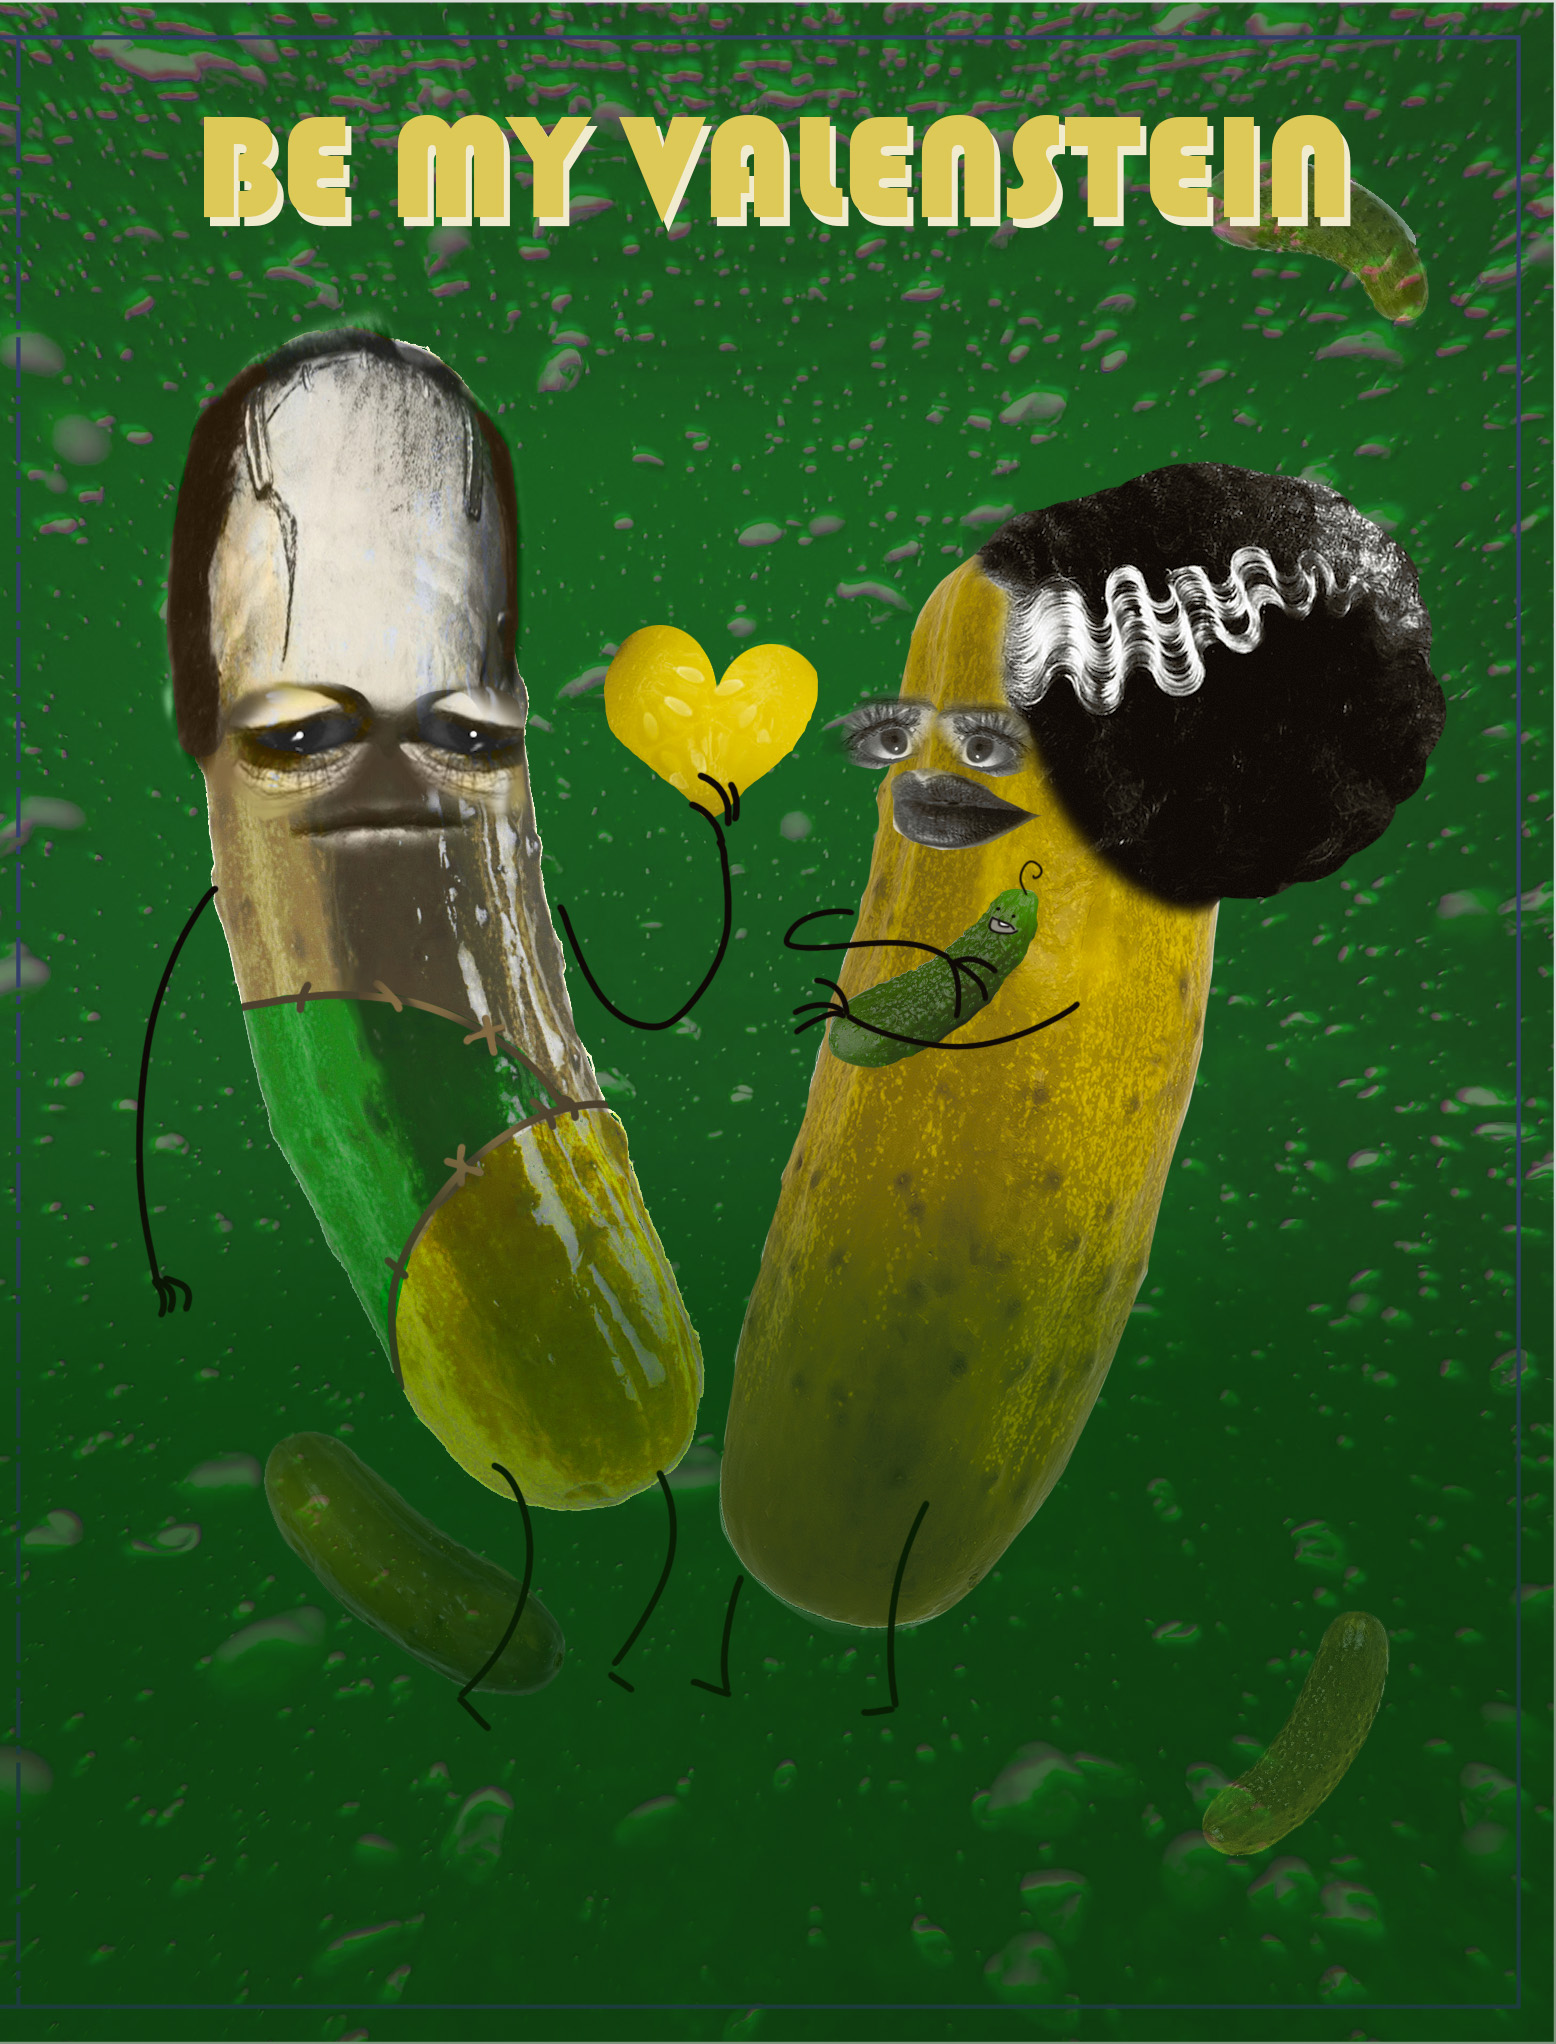 A humorous greeting card of a pickle version of Frankenstein and the Bride of Frankenstein.